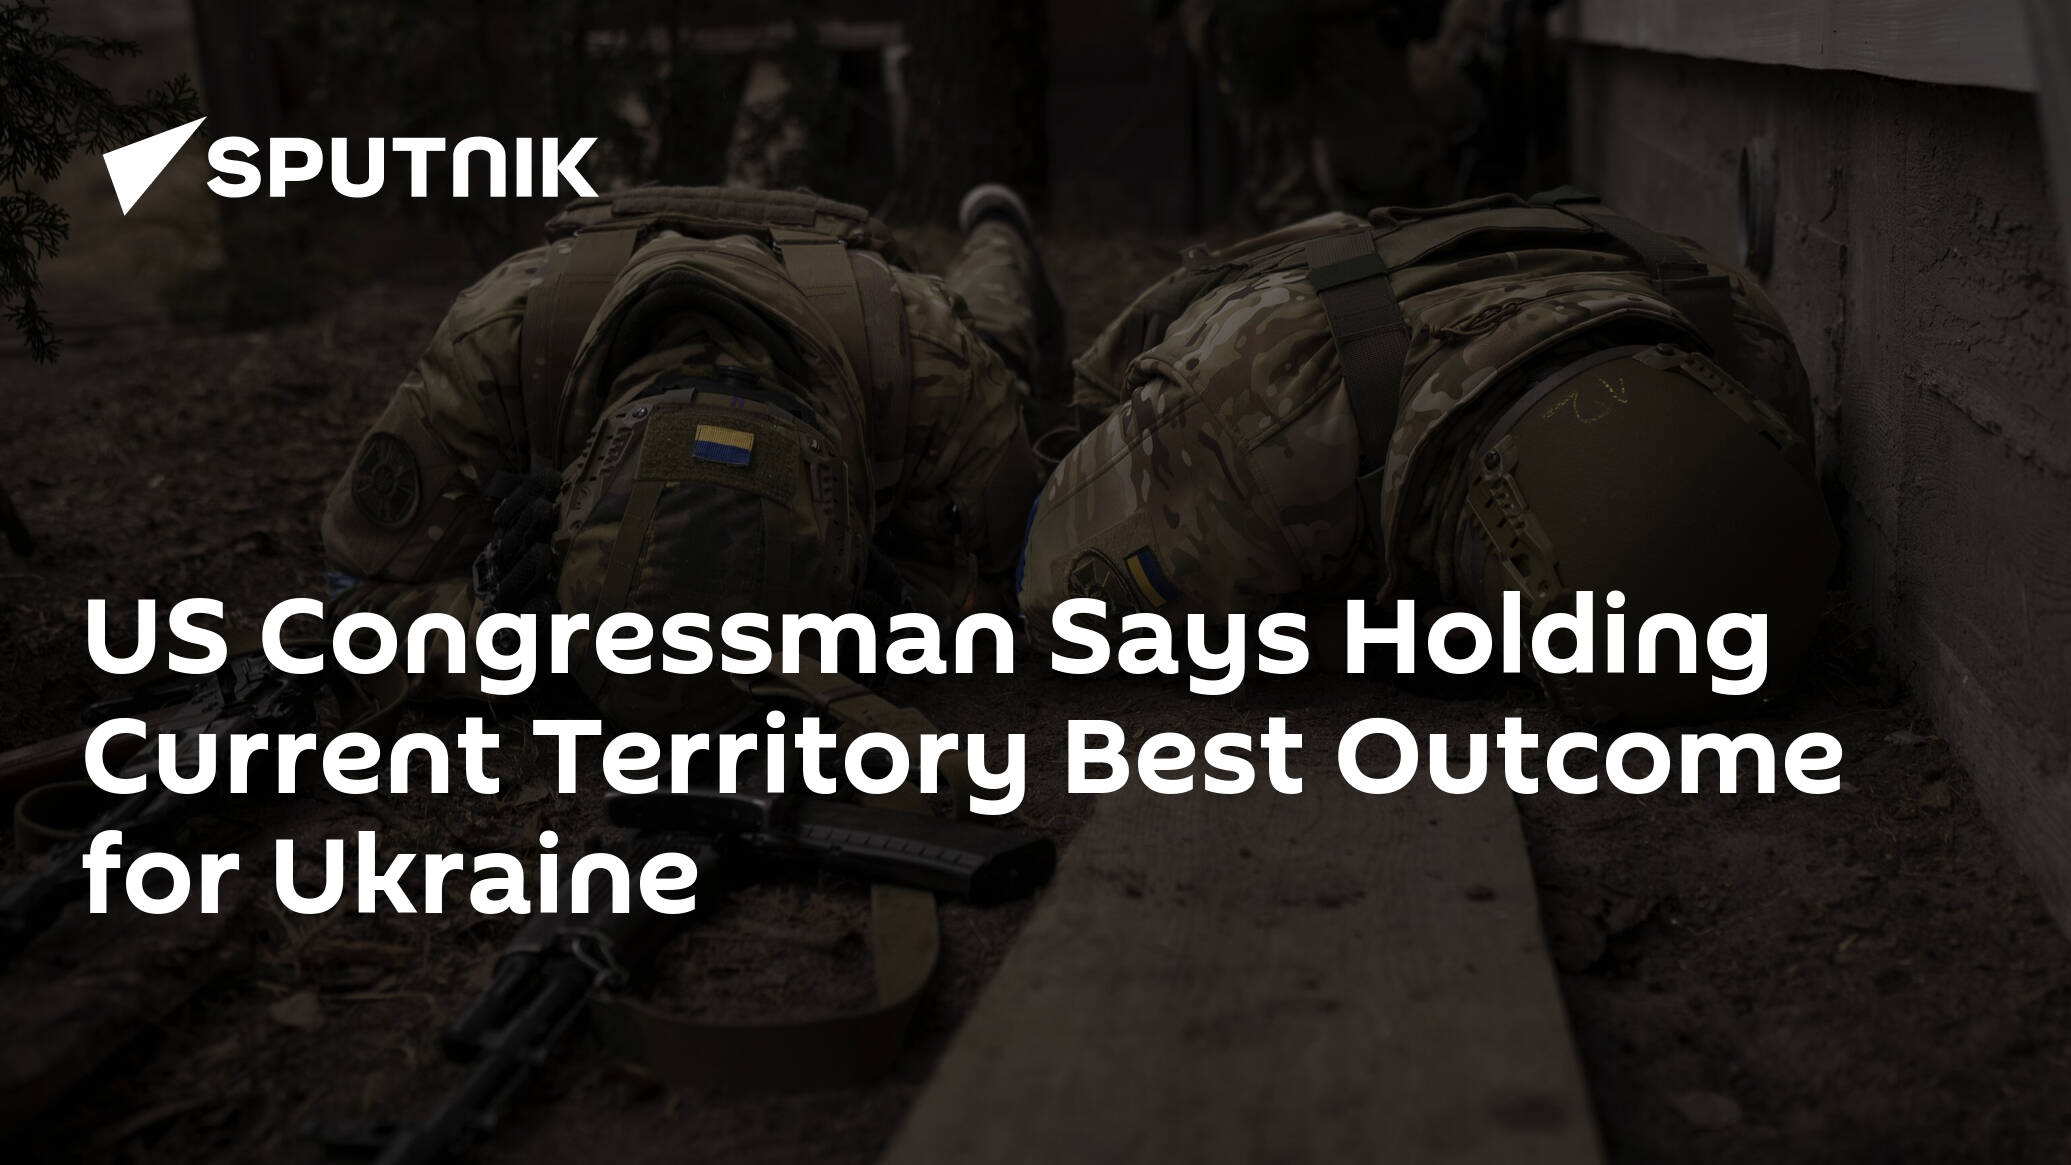 US Congressman Says Holding Current Territory Best Outcome for Ukraine